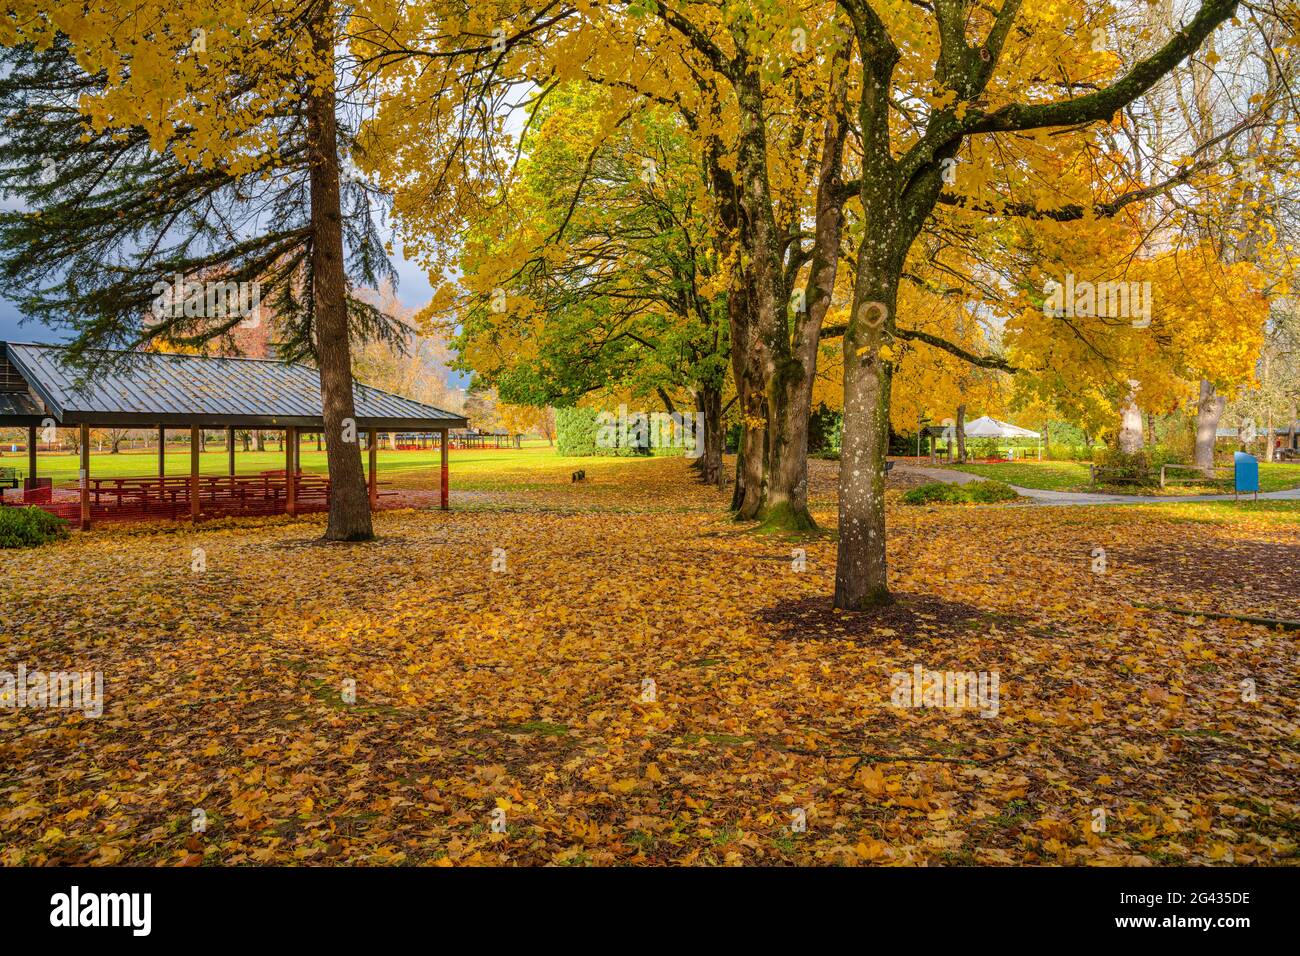 Public park with trees in autumn colors, Oregon, USA Stock Photo